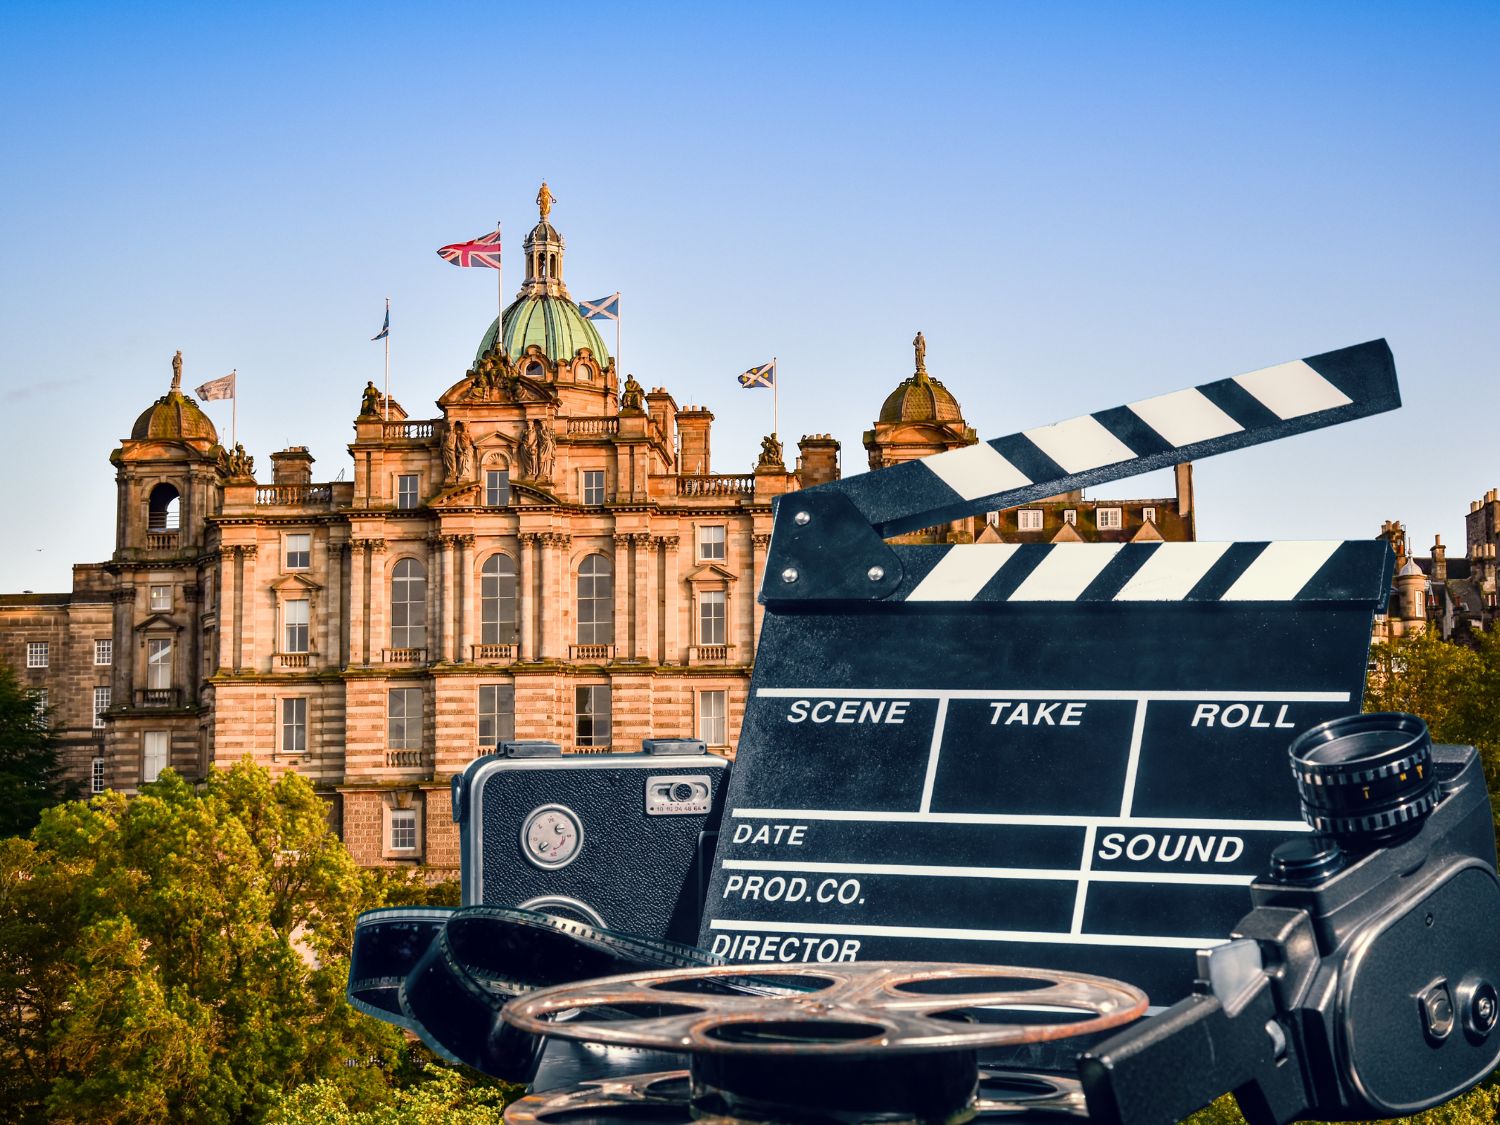 10 Extraordinary Movies Set In Edinburgh That Will Inspire You To Visit!